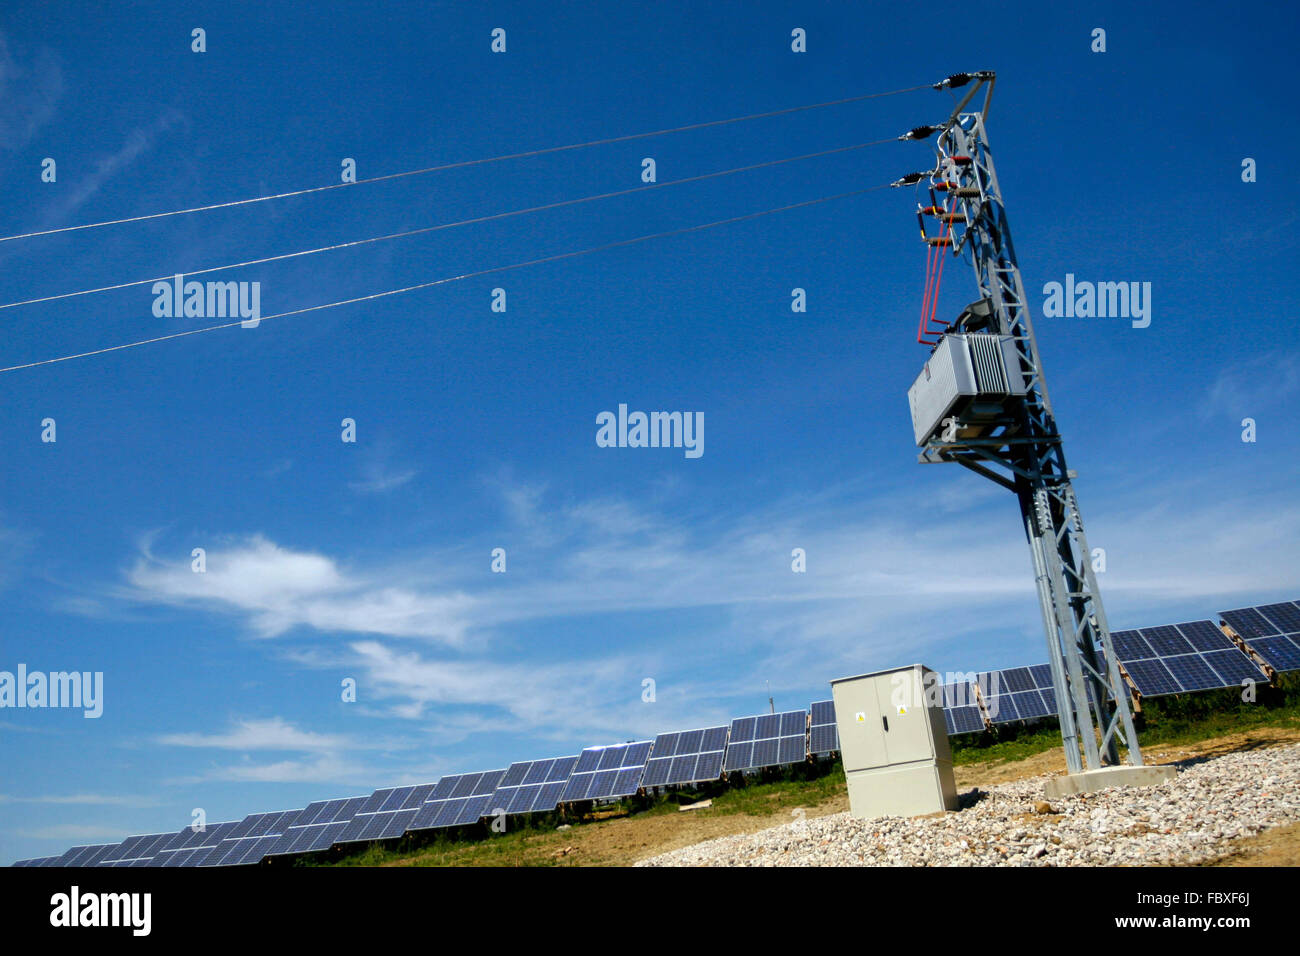 Power lines and wires, Electrical transformer on pole and solar panels Stock Photo